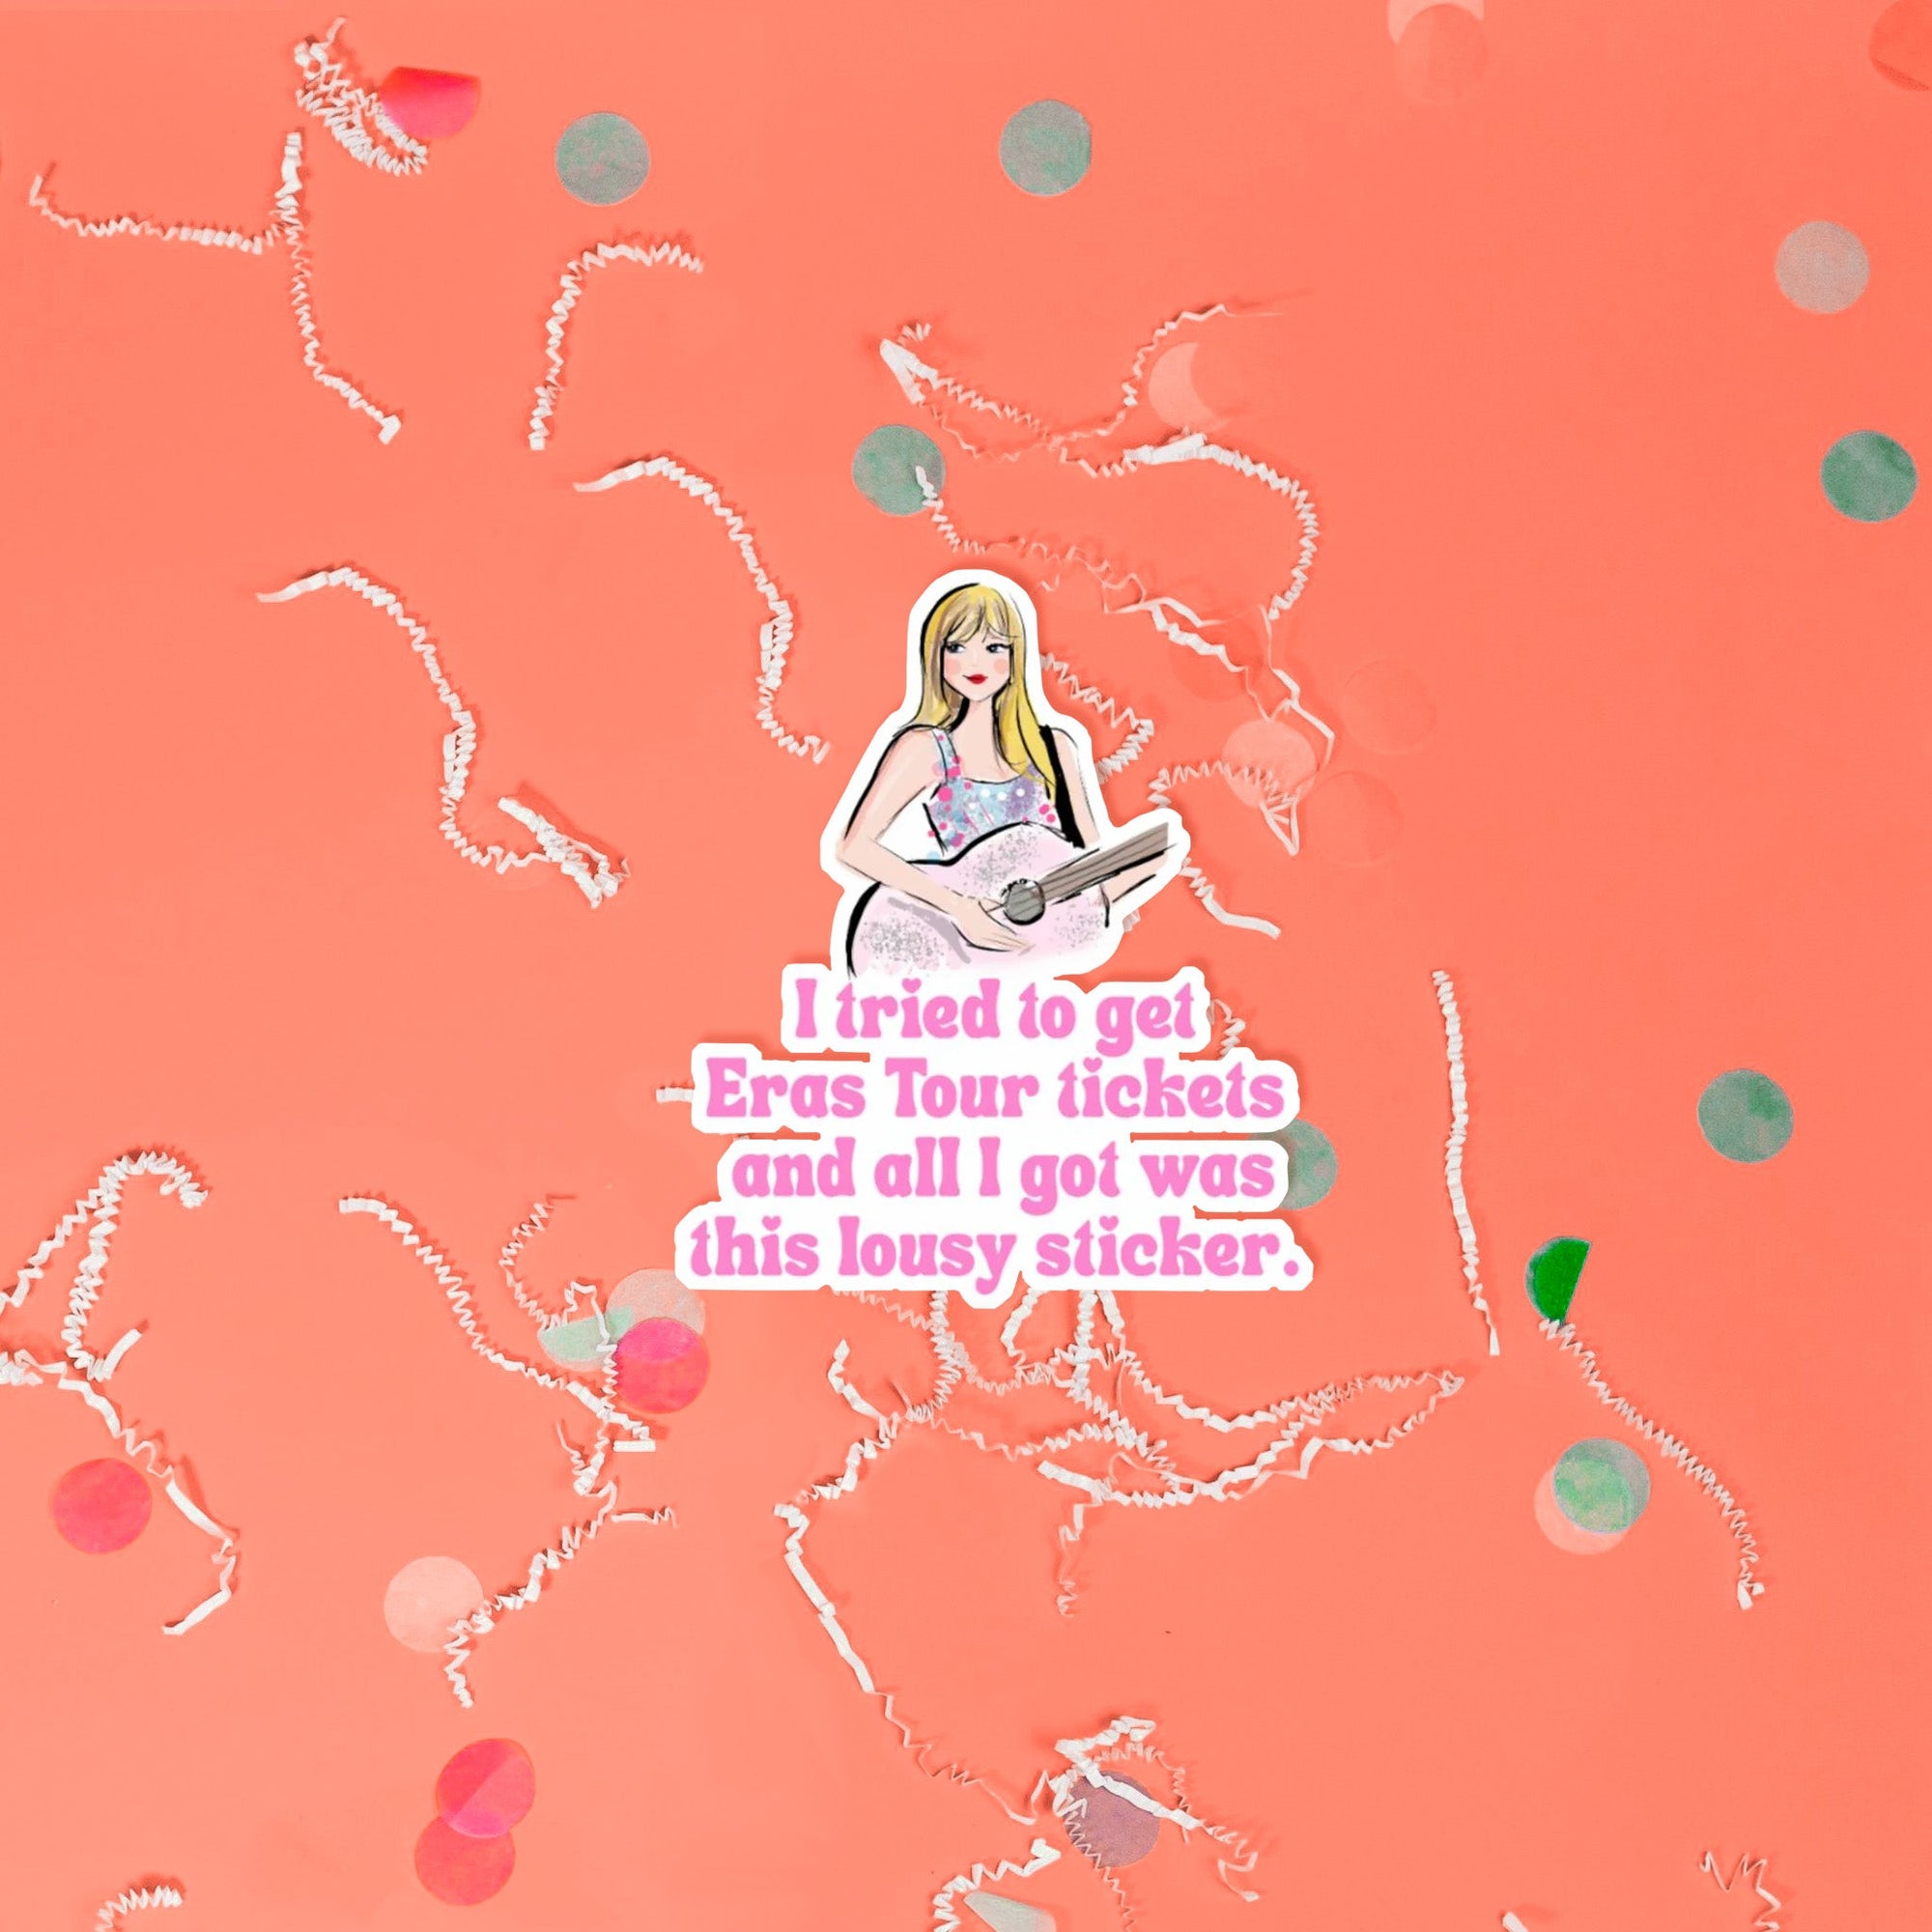 On a coral pink background sits a sticker with white crinkle and big, colorful confetti scattered around. This Taylor Swift inspired sticker is an illustration of Taylor Swift holding a pink glitter guitar and it says "I tried to get Eras Tour tickets and all I got was this lousy sticker" in bubblegum pink lettering.